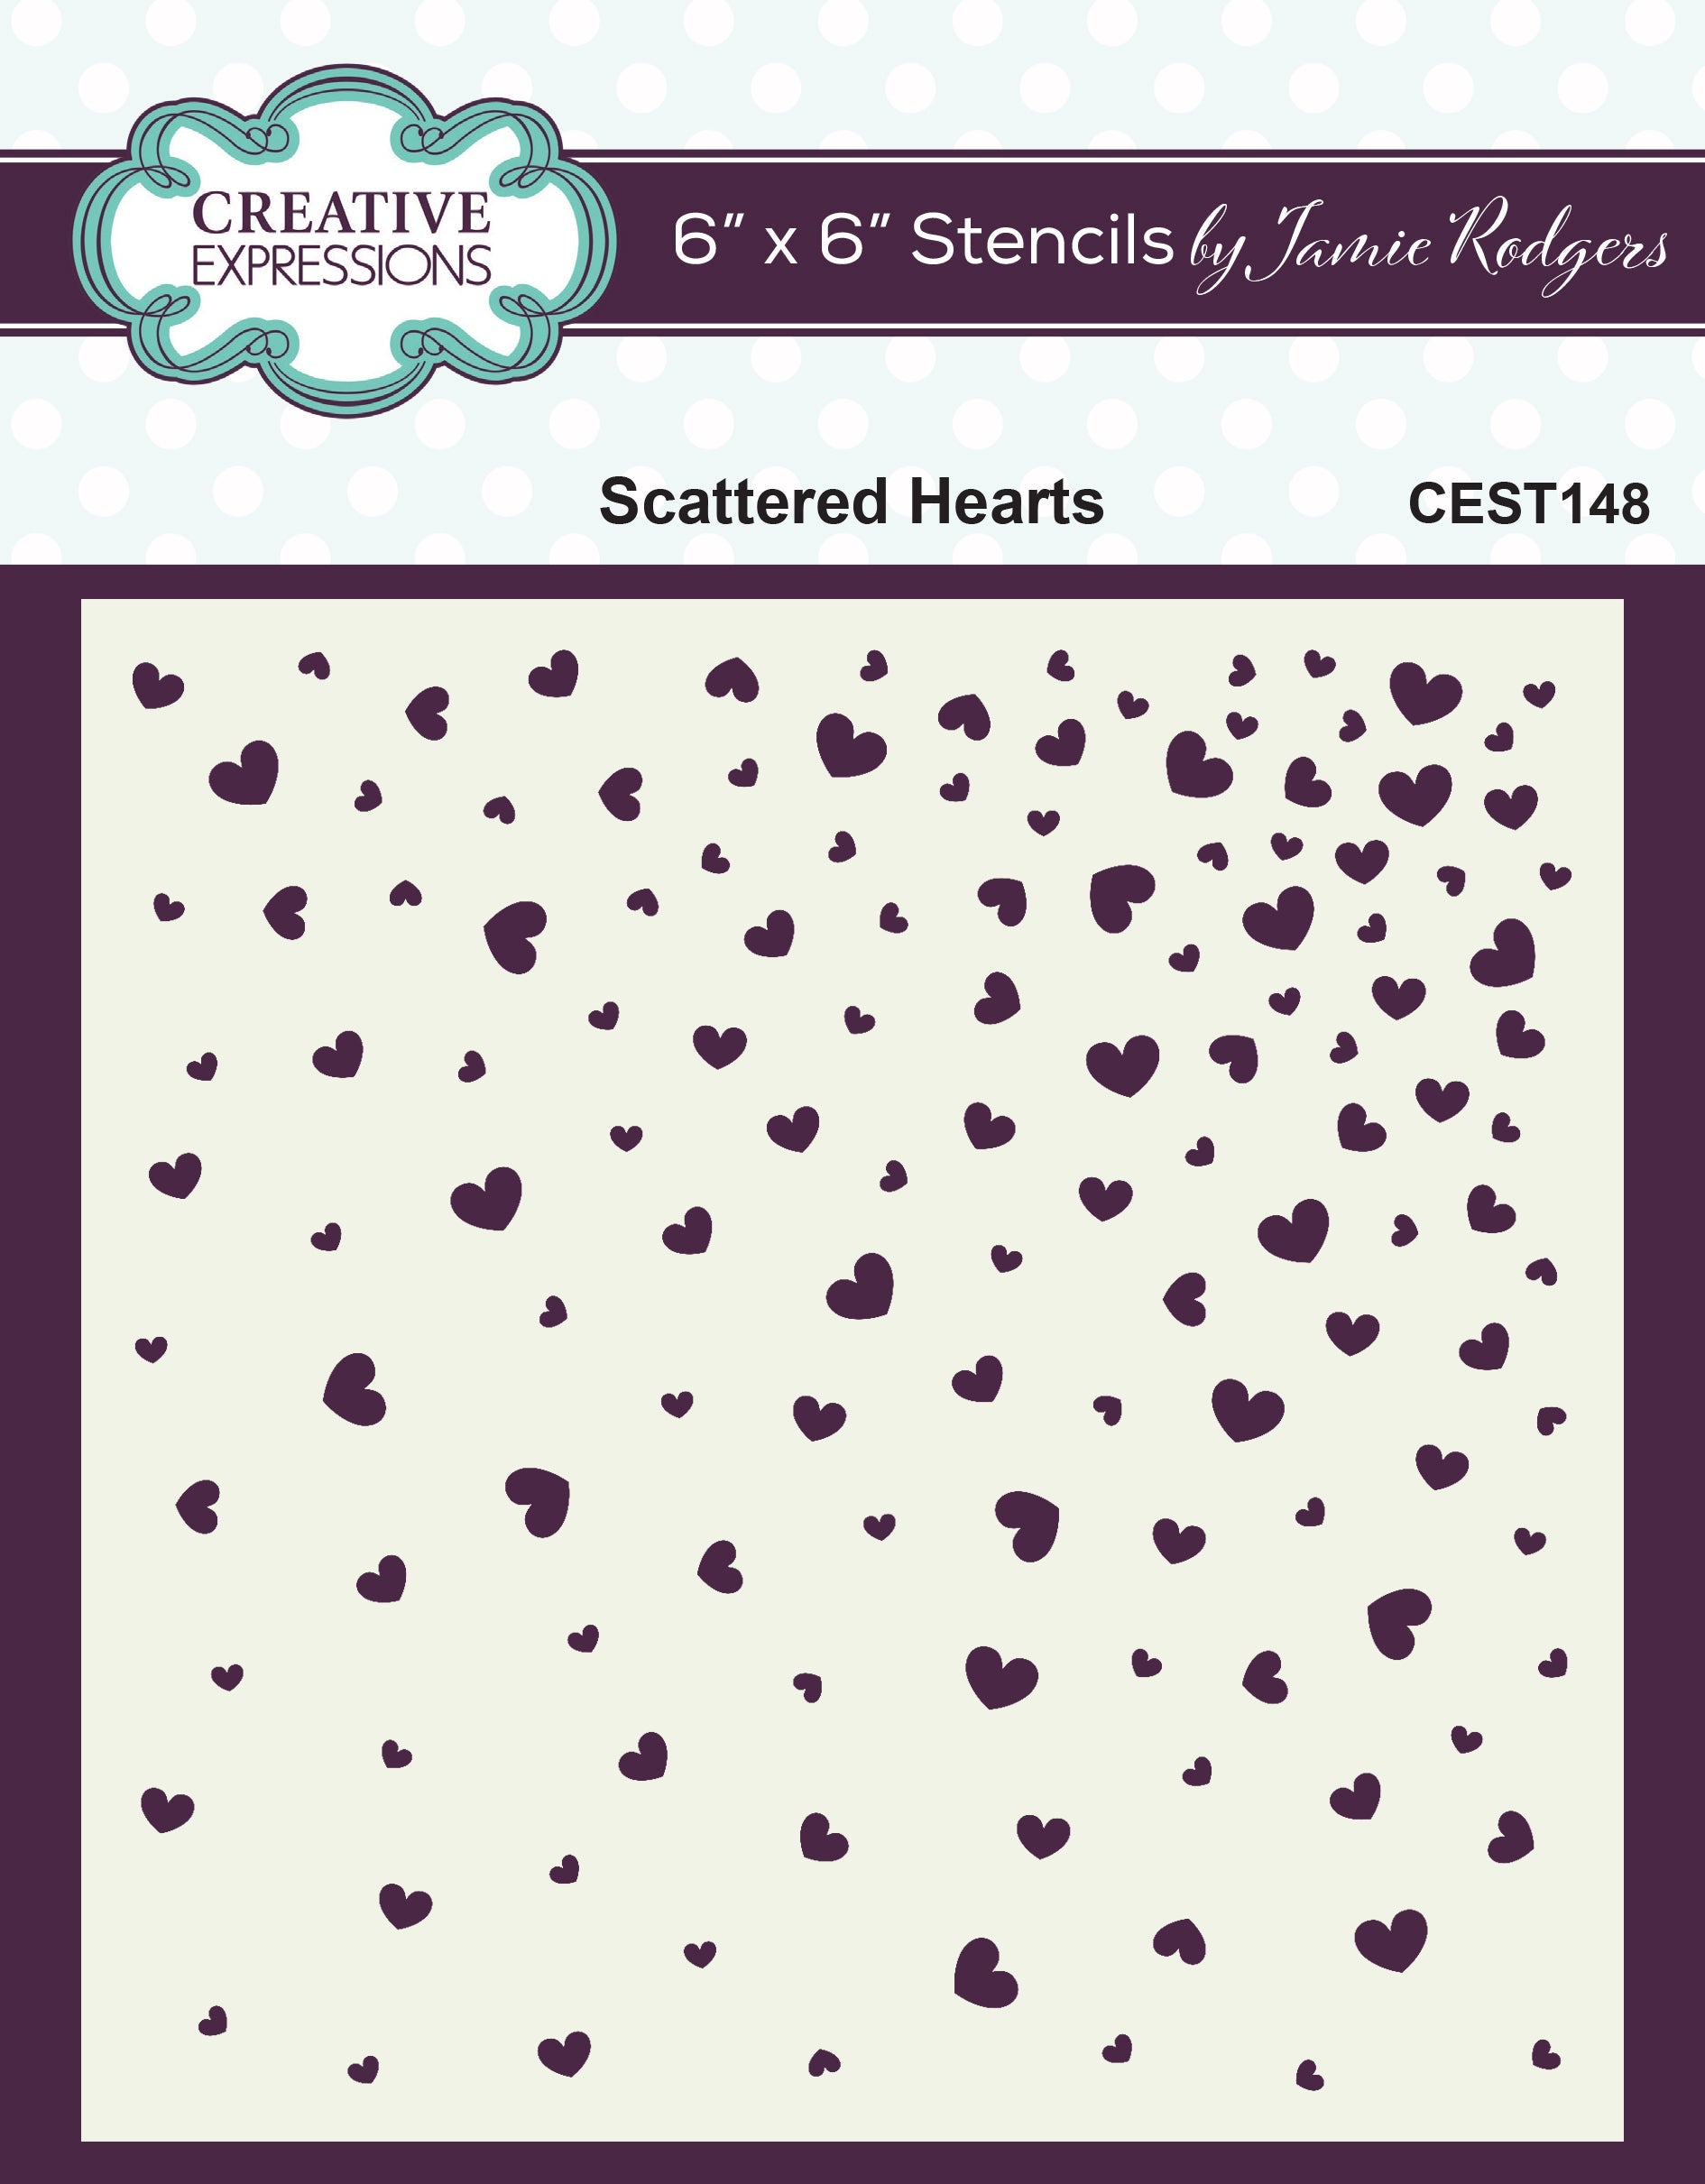 Creative Expressions Scattered Hearts Jamie Rodgers 6 in x 6 in Stencil